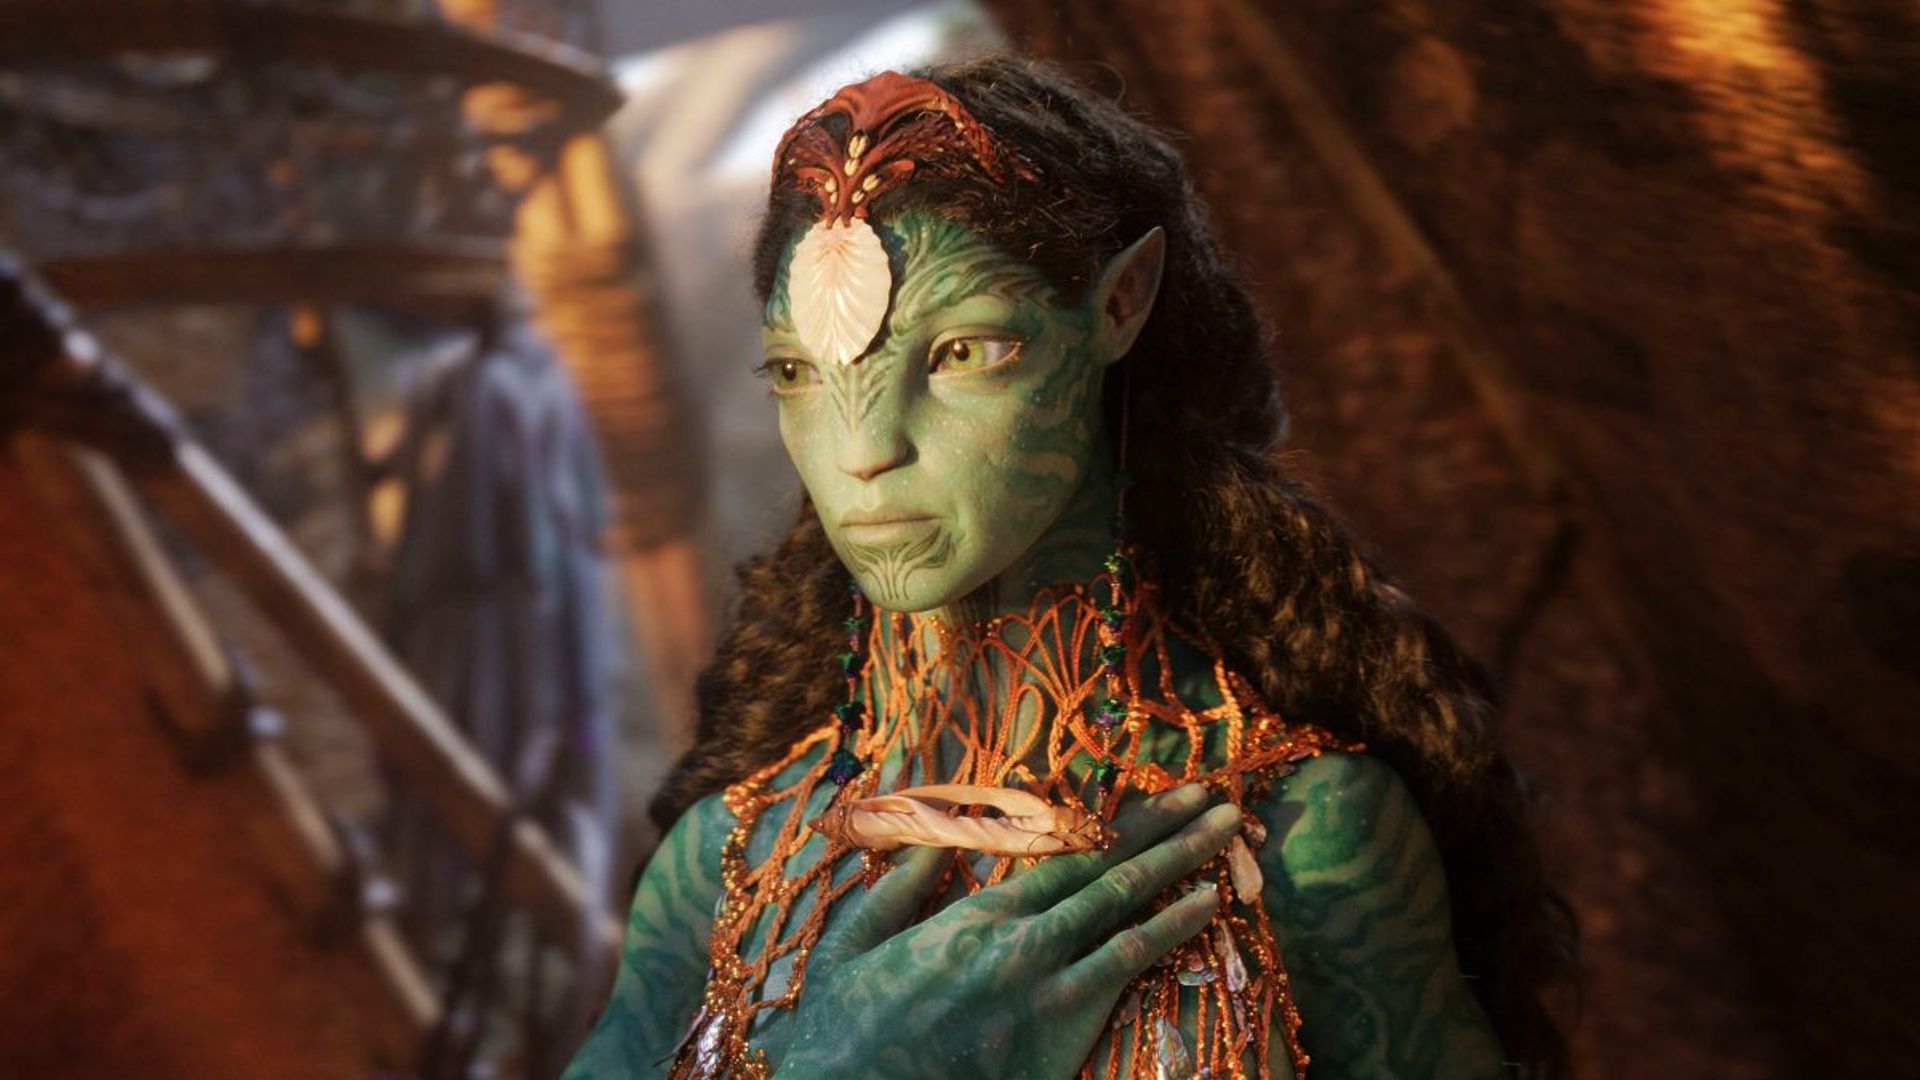 Avatar: The Way of Water’s trailer is here, and it is stunning